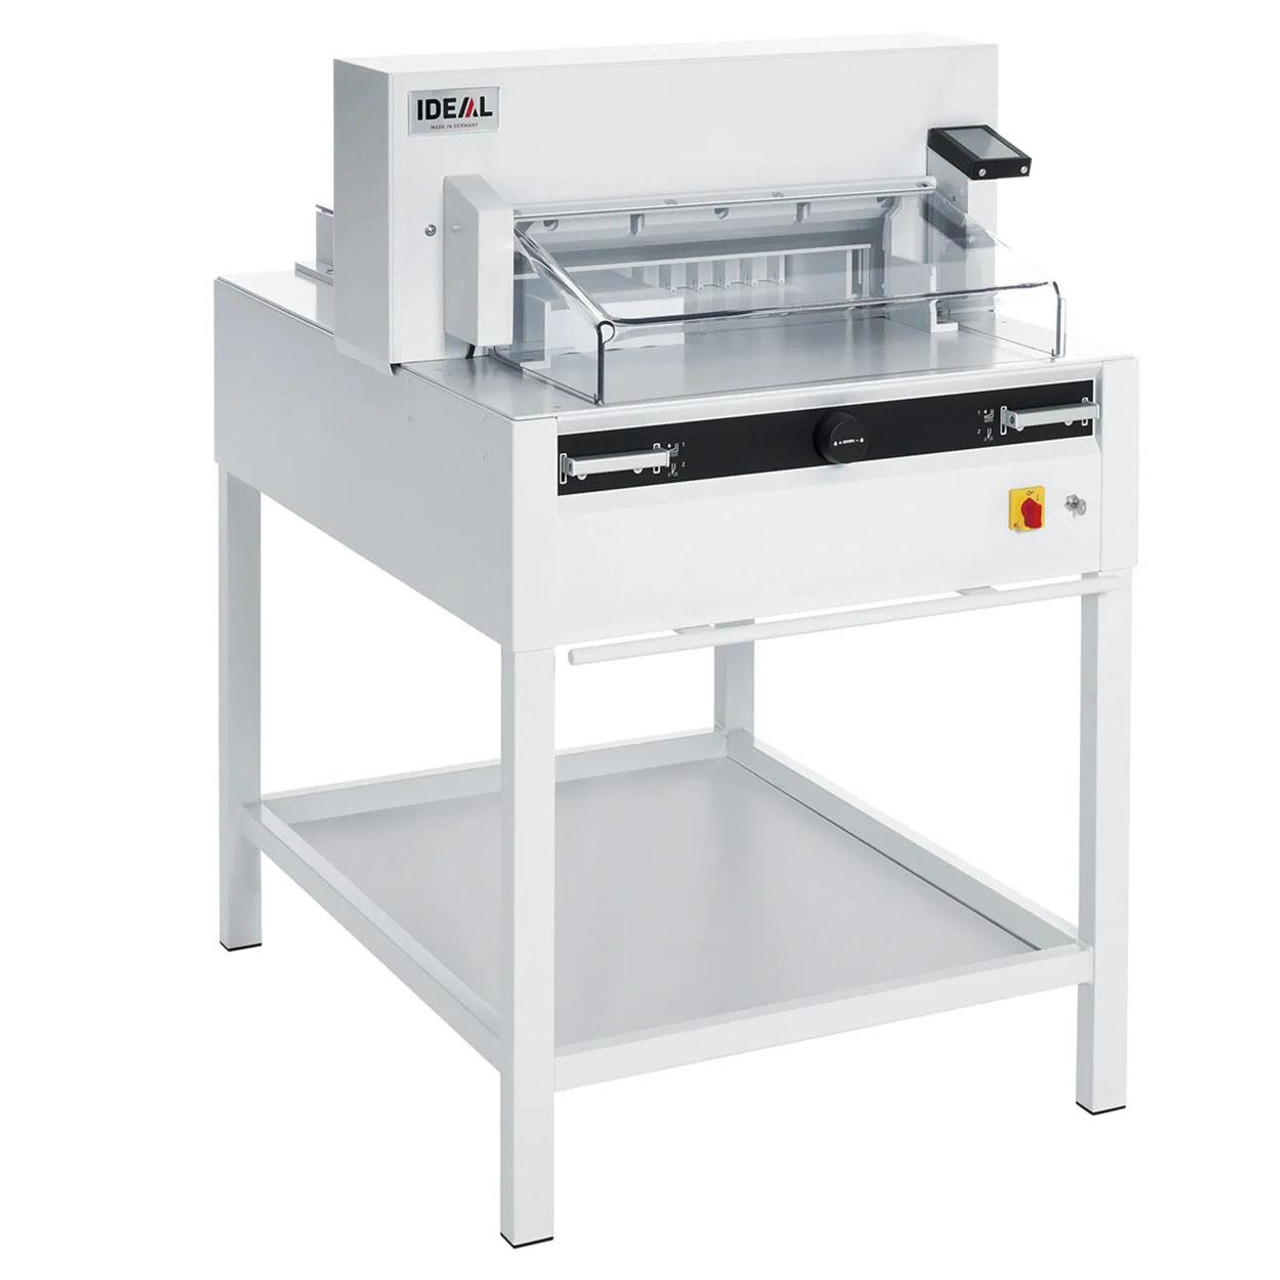 IDEAL 5255 Paper Guillotine